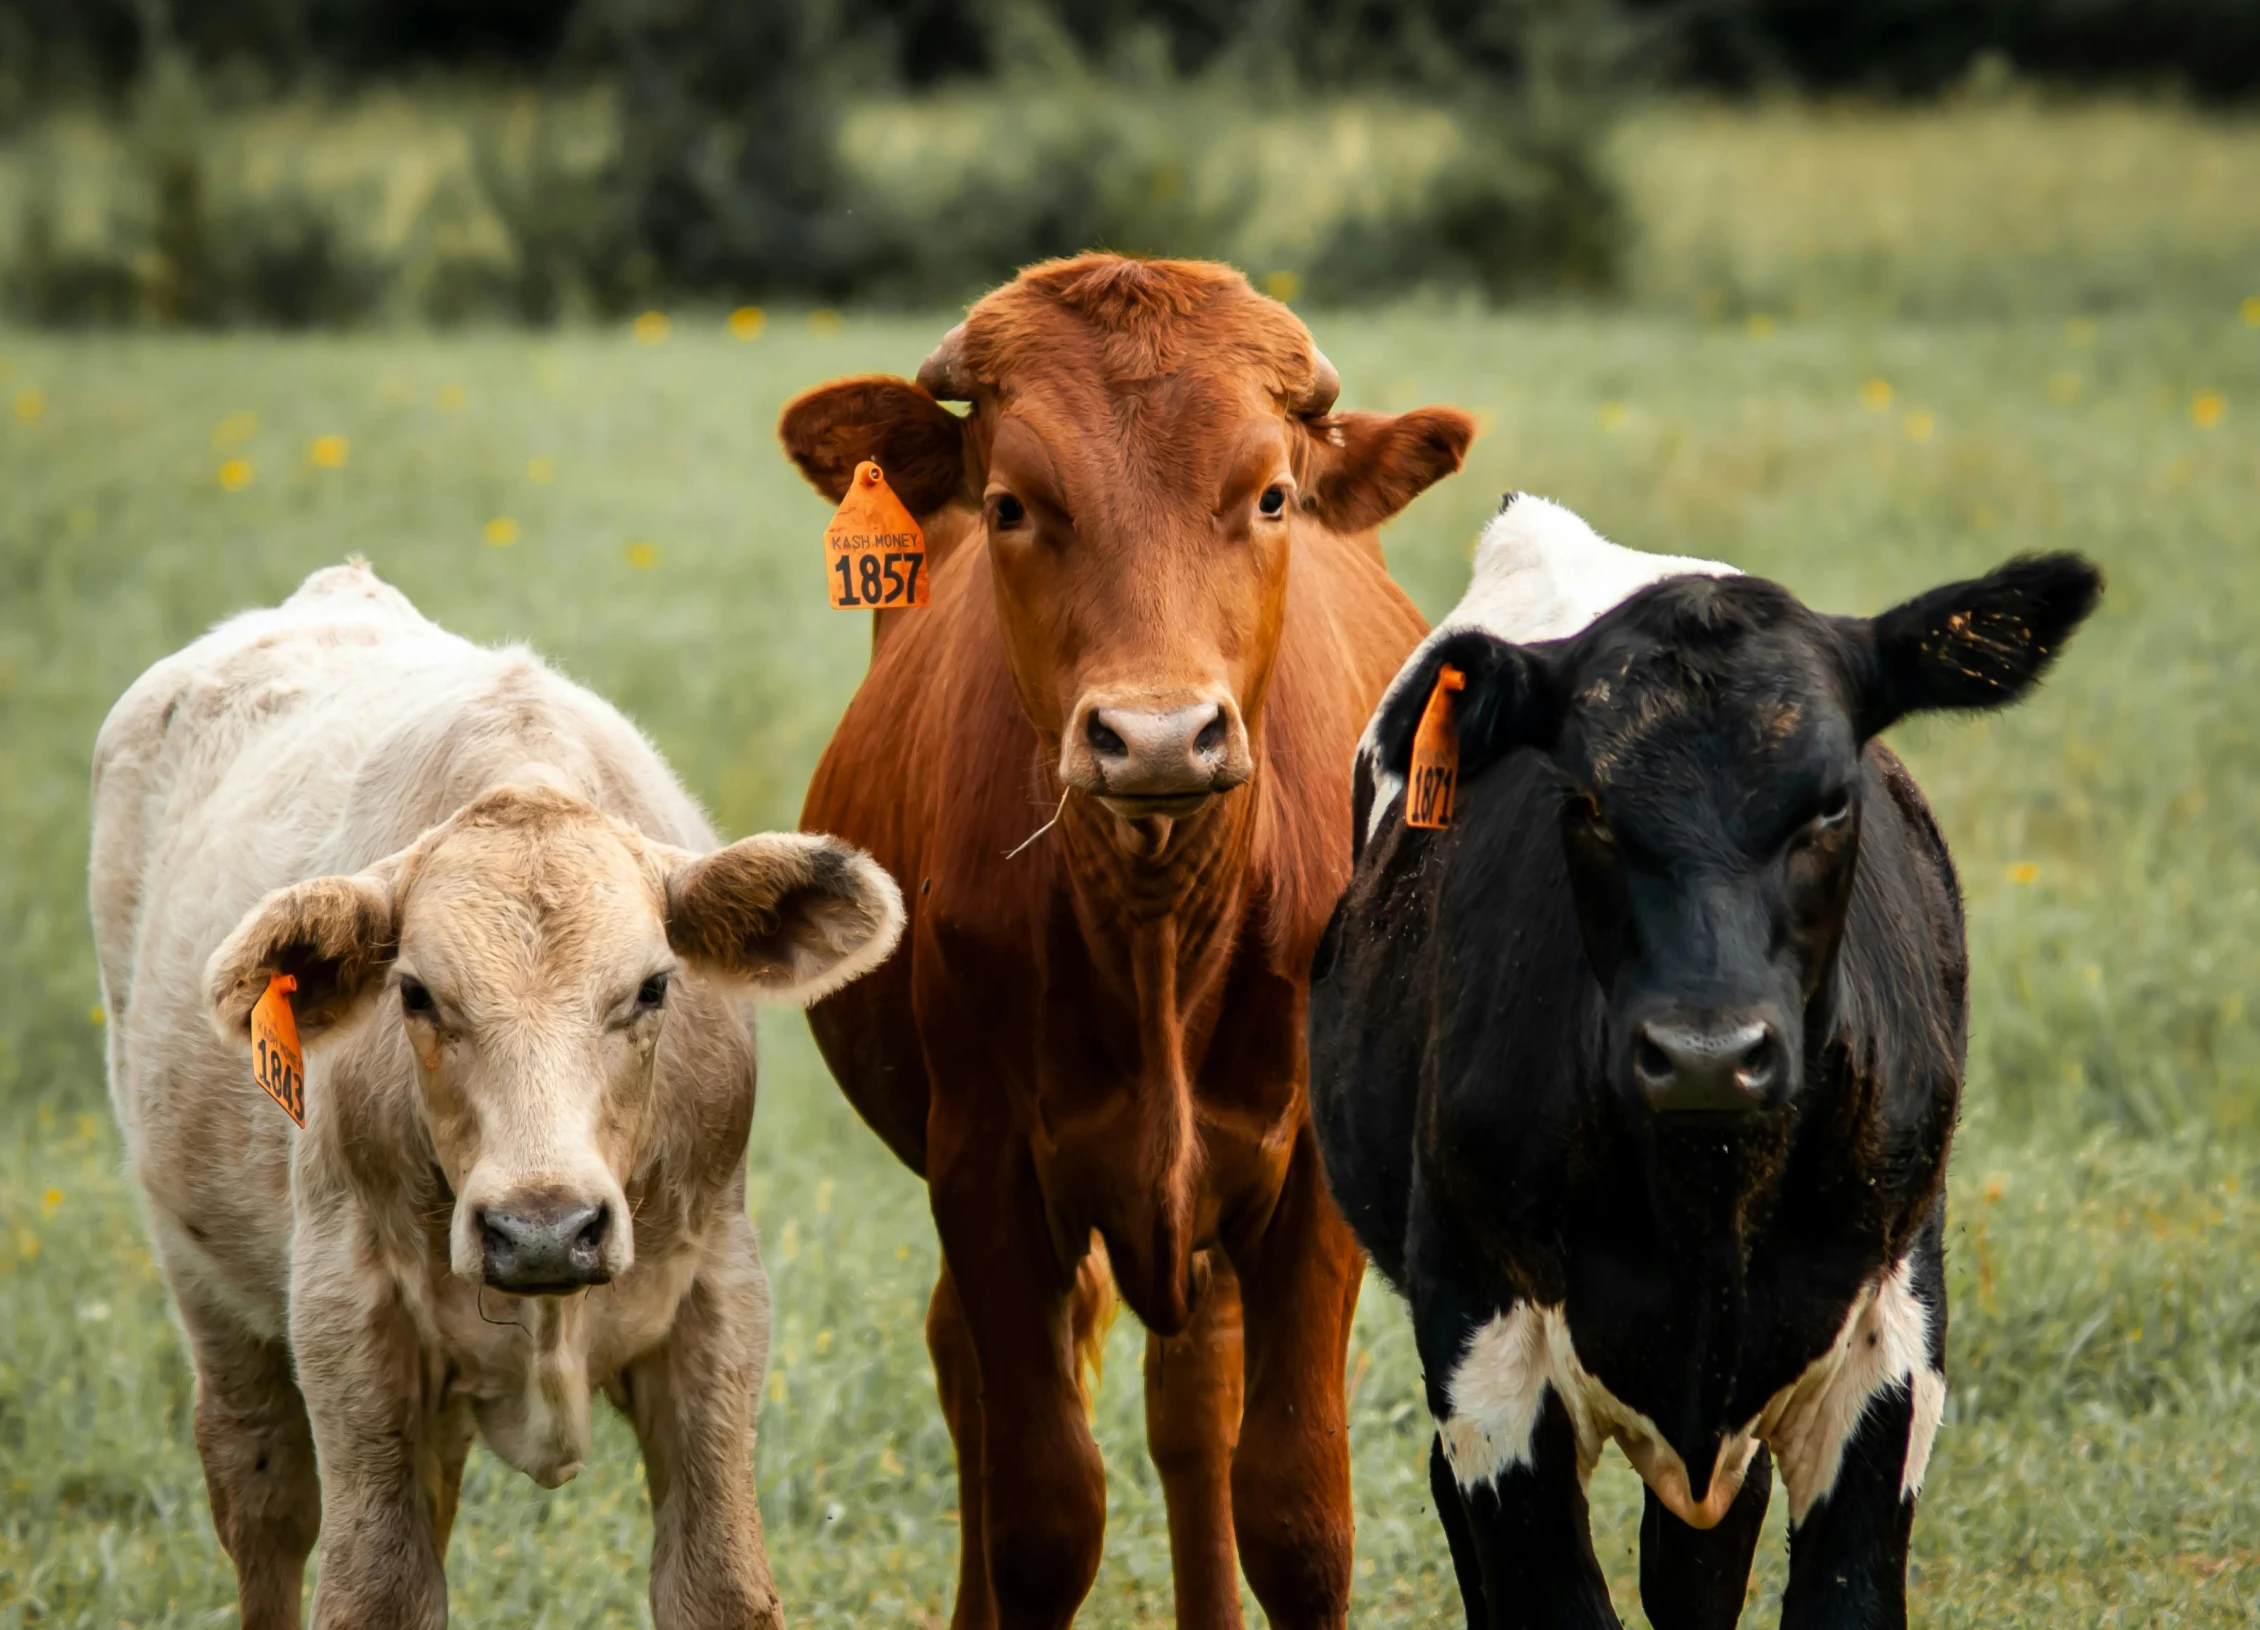 three cows standing next to each other in a field, pexels contest winner, fan favorite, ready to eat, varying ethnicities, brown